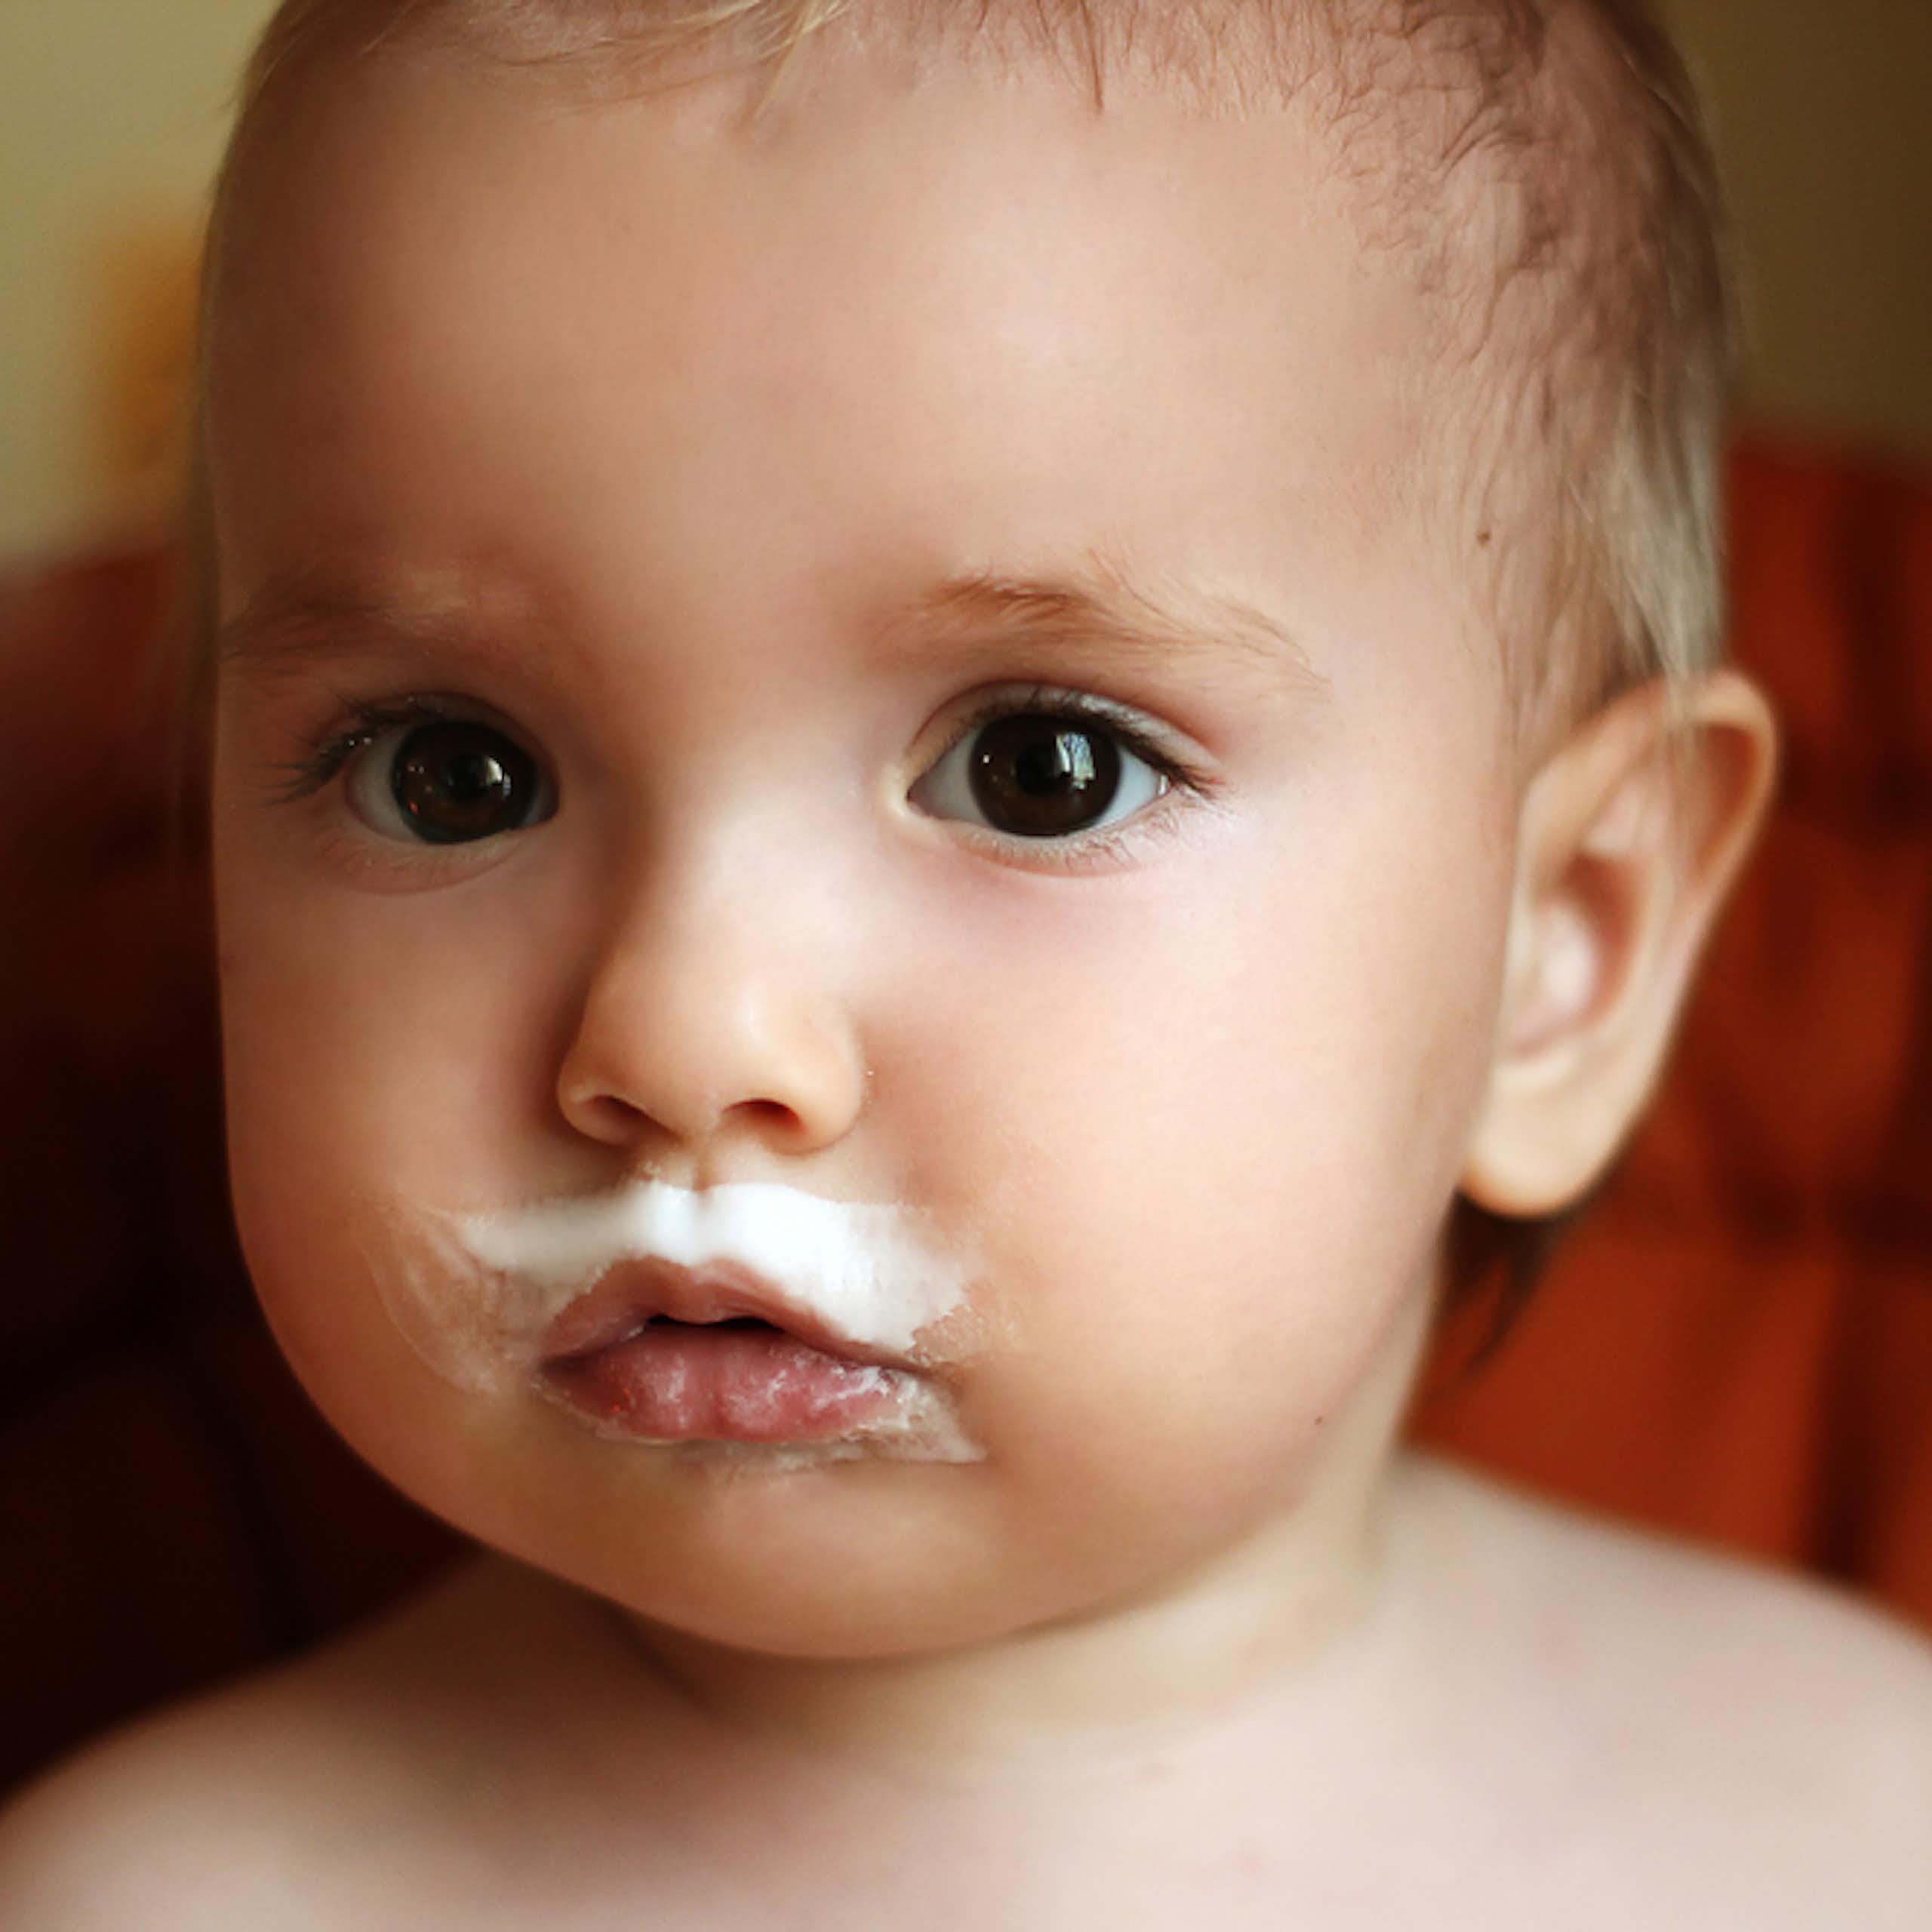 Cute baby with milk around mouth, including a milk mustache